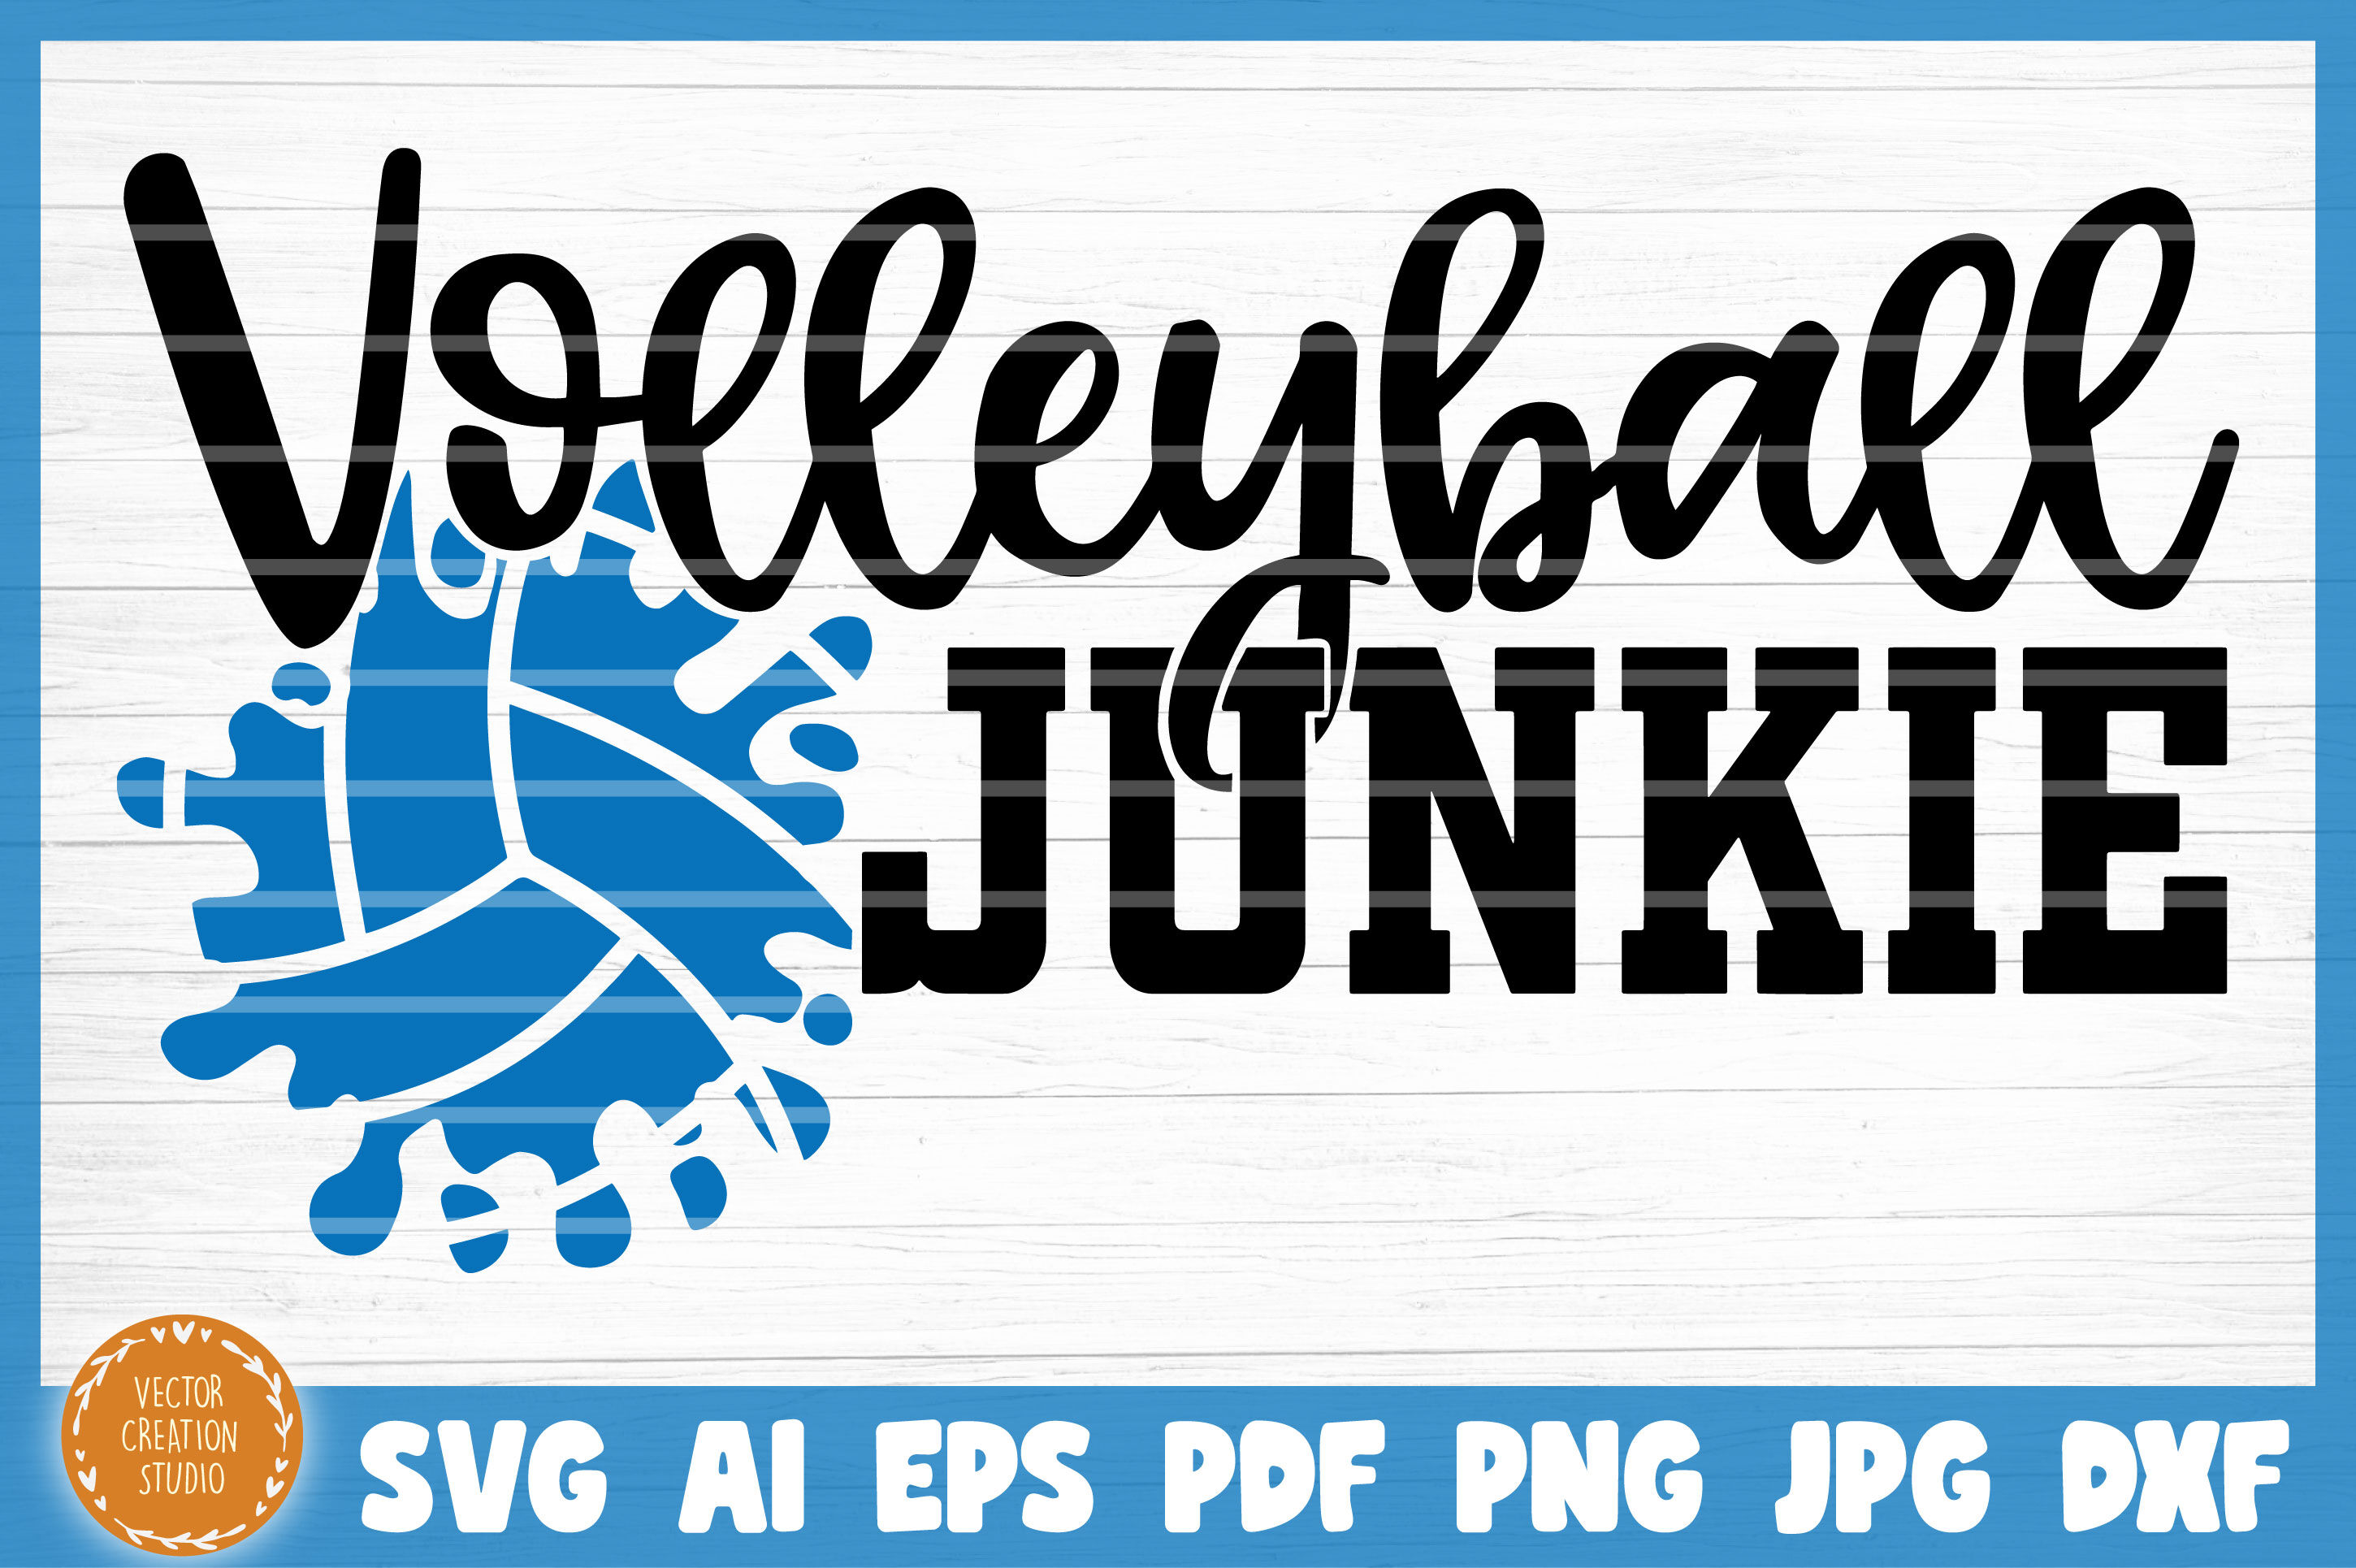 Download Volleyball Junkie Svg Cut File By Vectorcreationstudio Thehungryjpeg Com